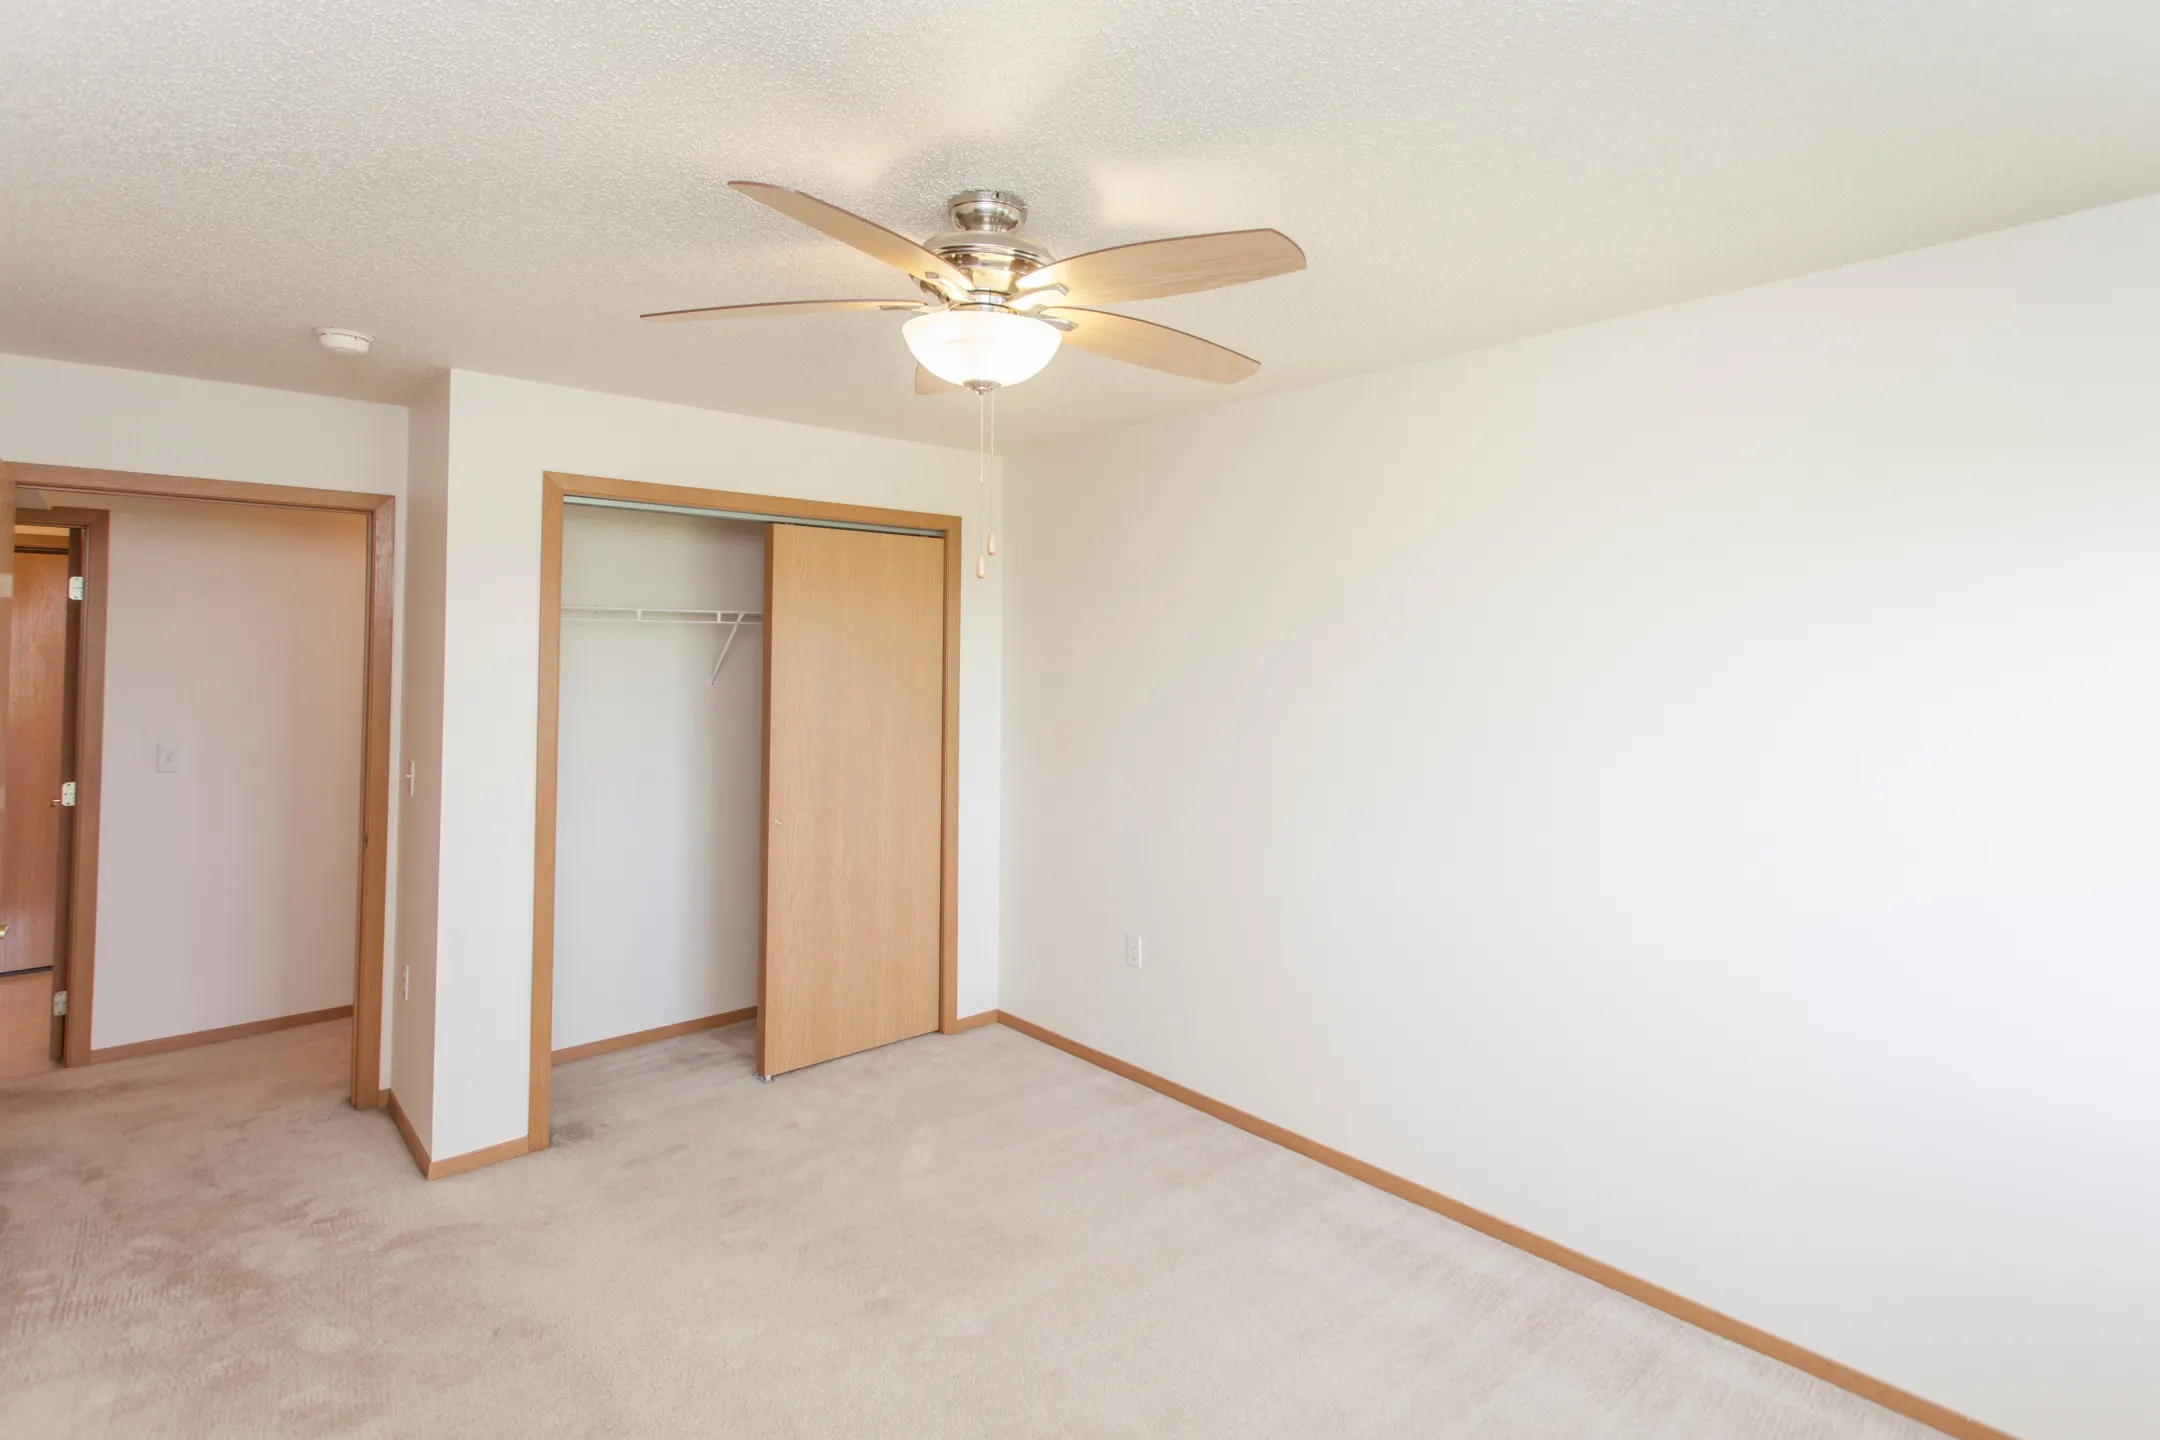 Bedroom - Platinum Valley Apartments - Sioux Falls, SD